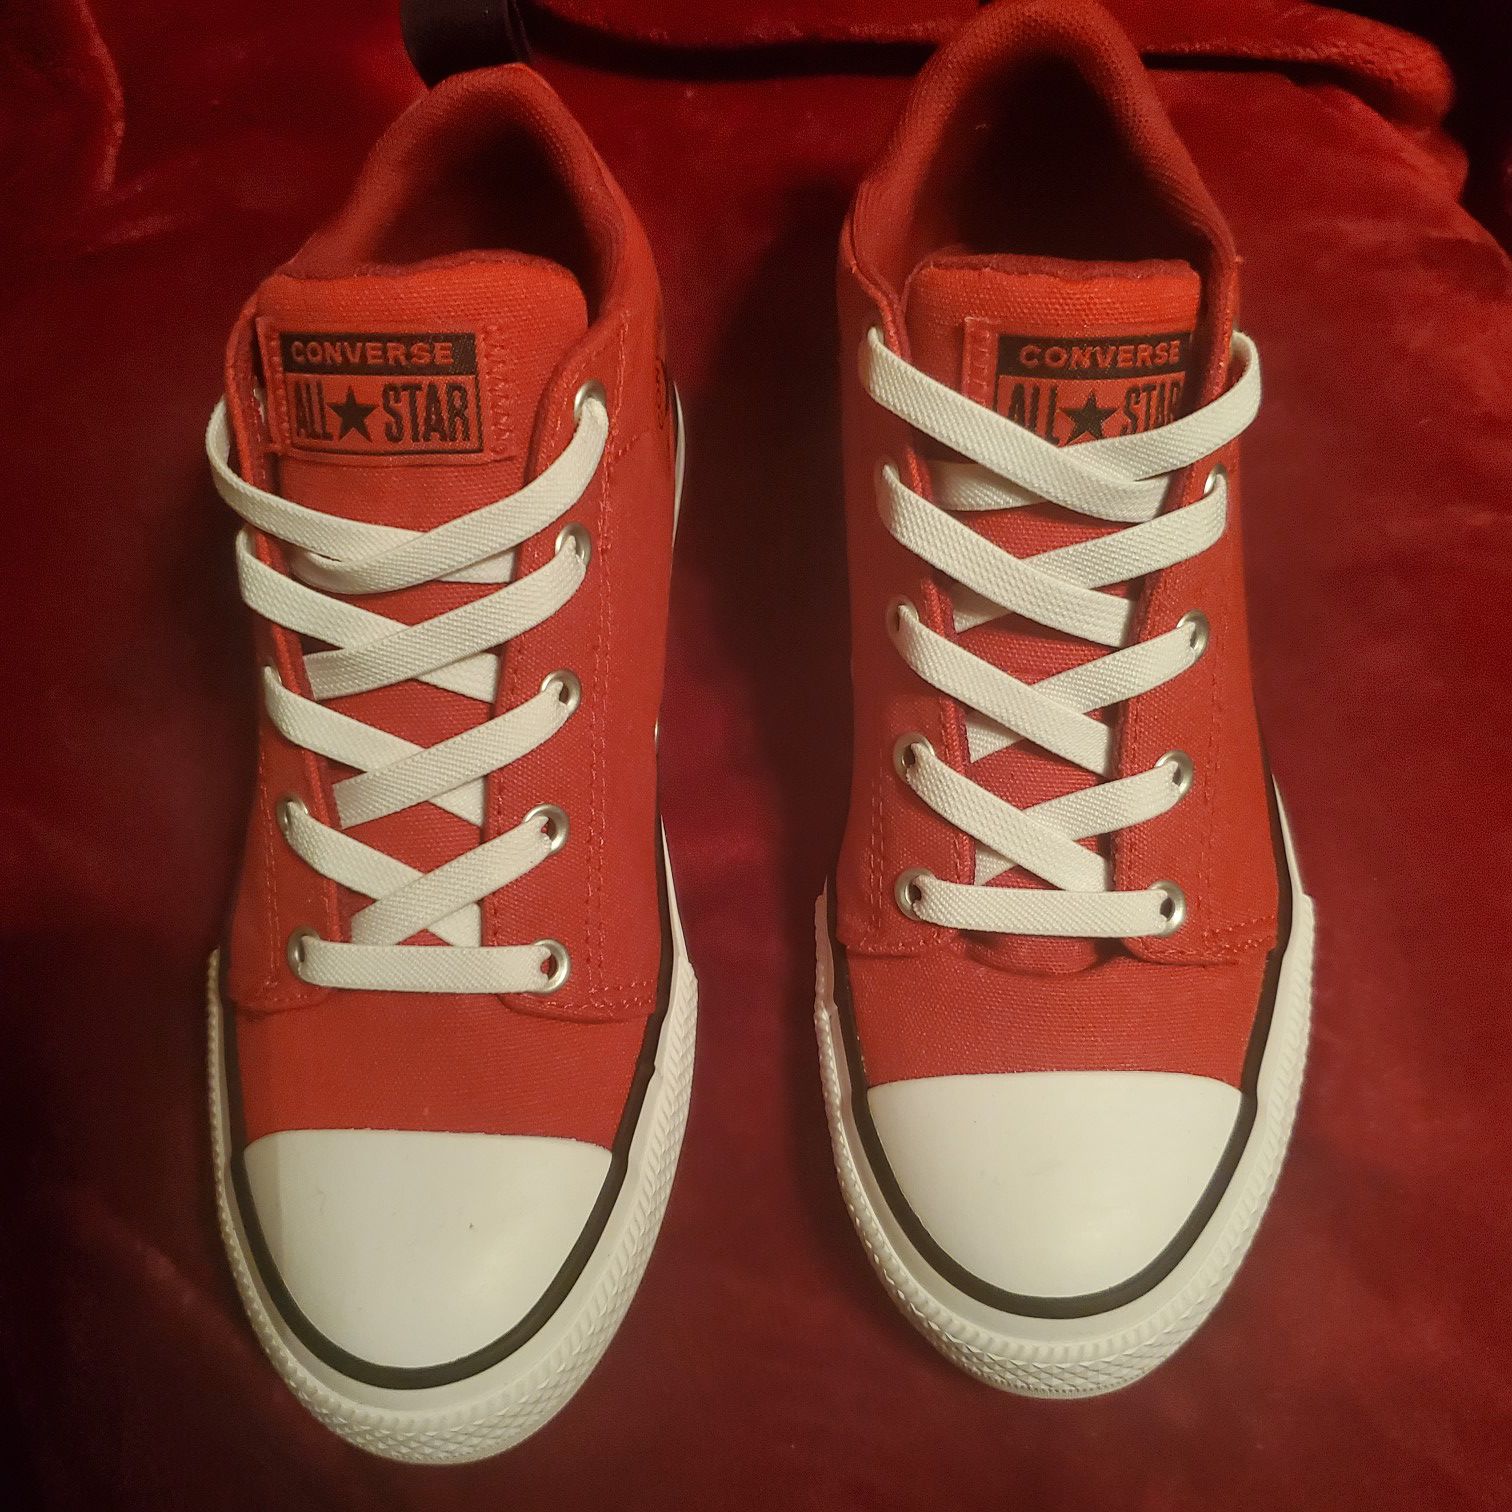 Boy's Converse lace up sneakers size 3